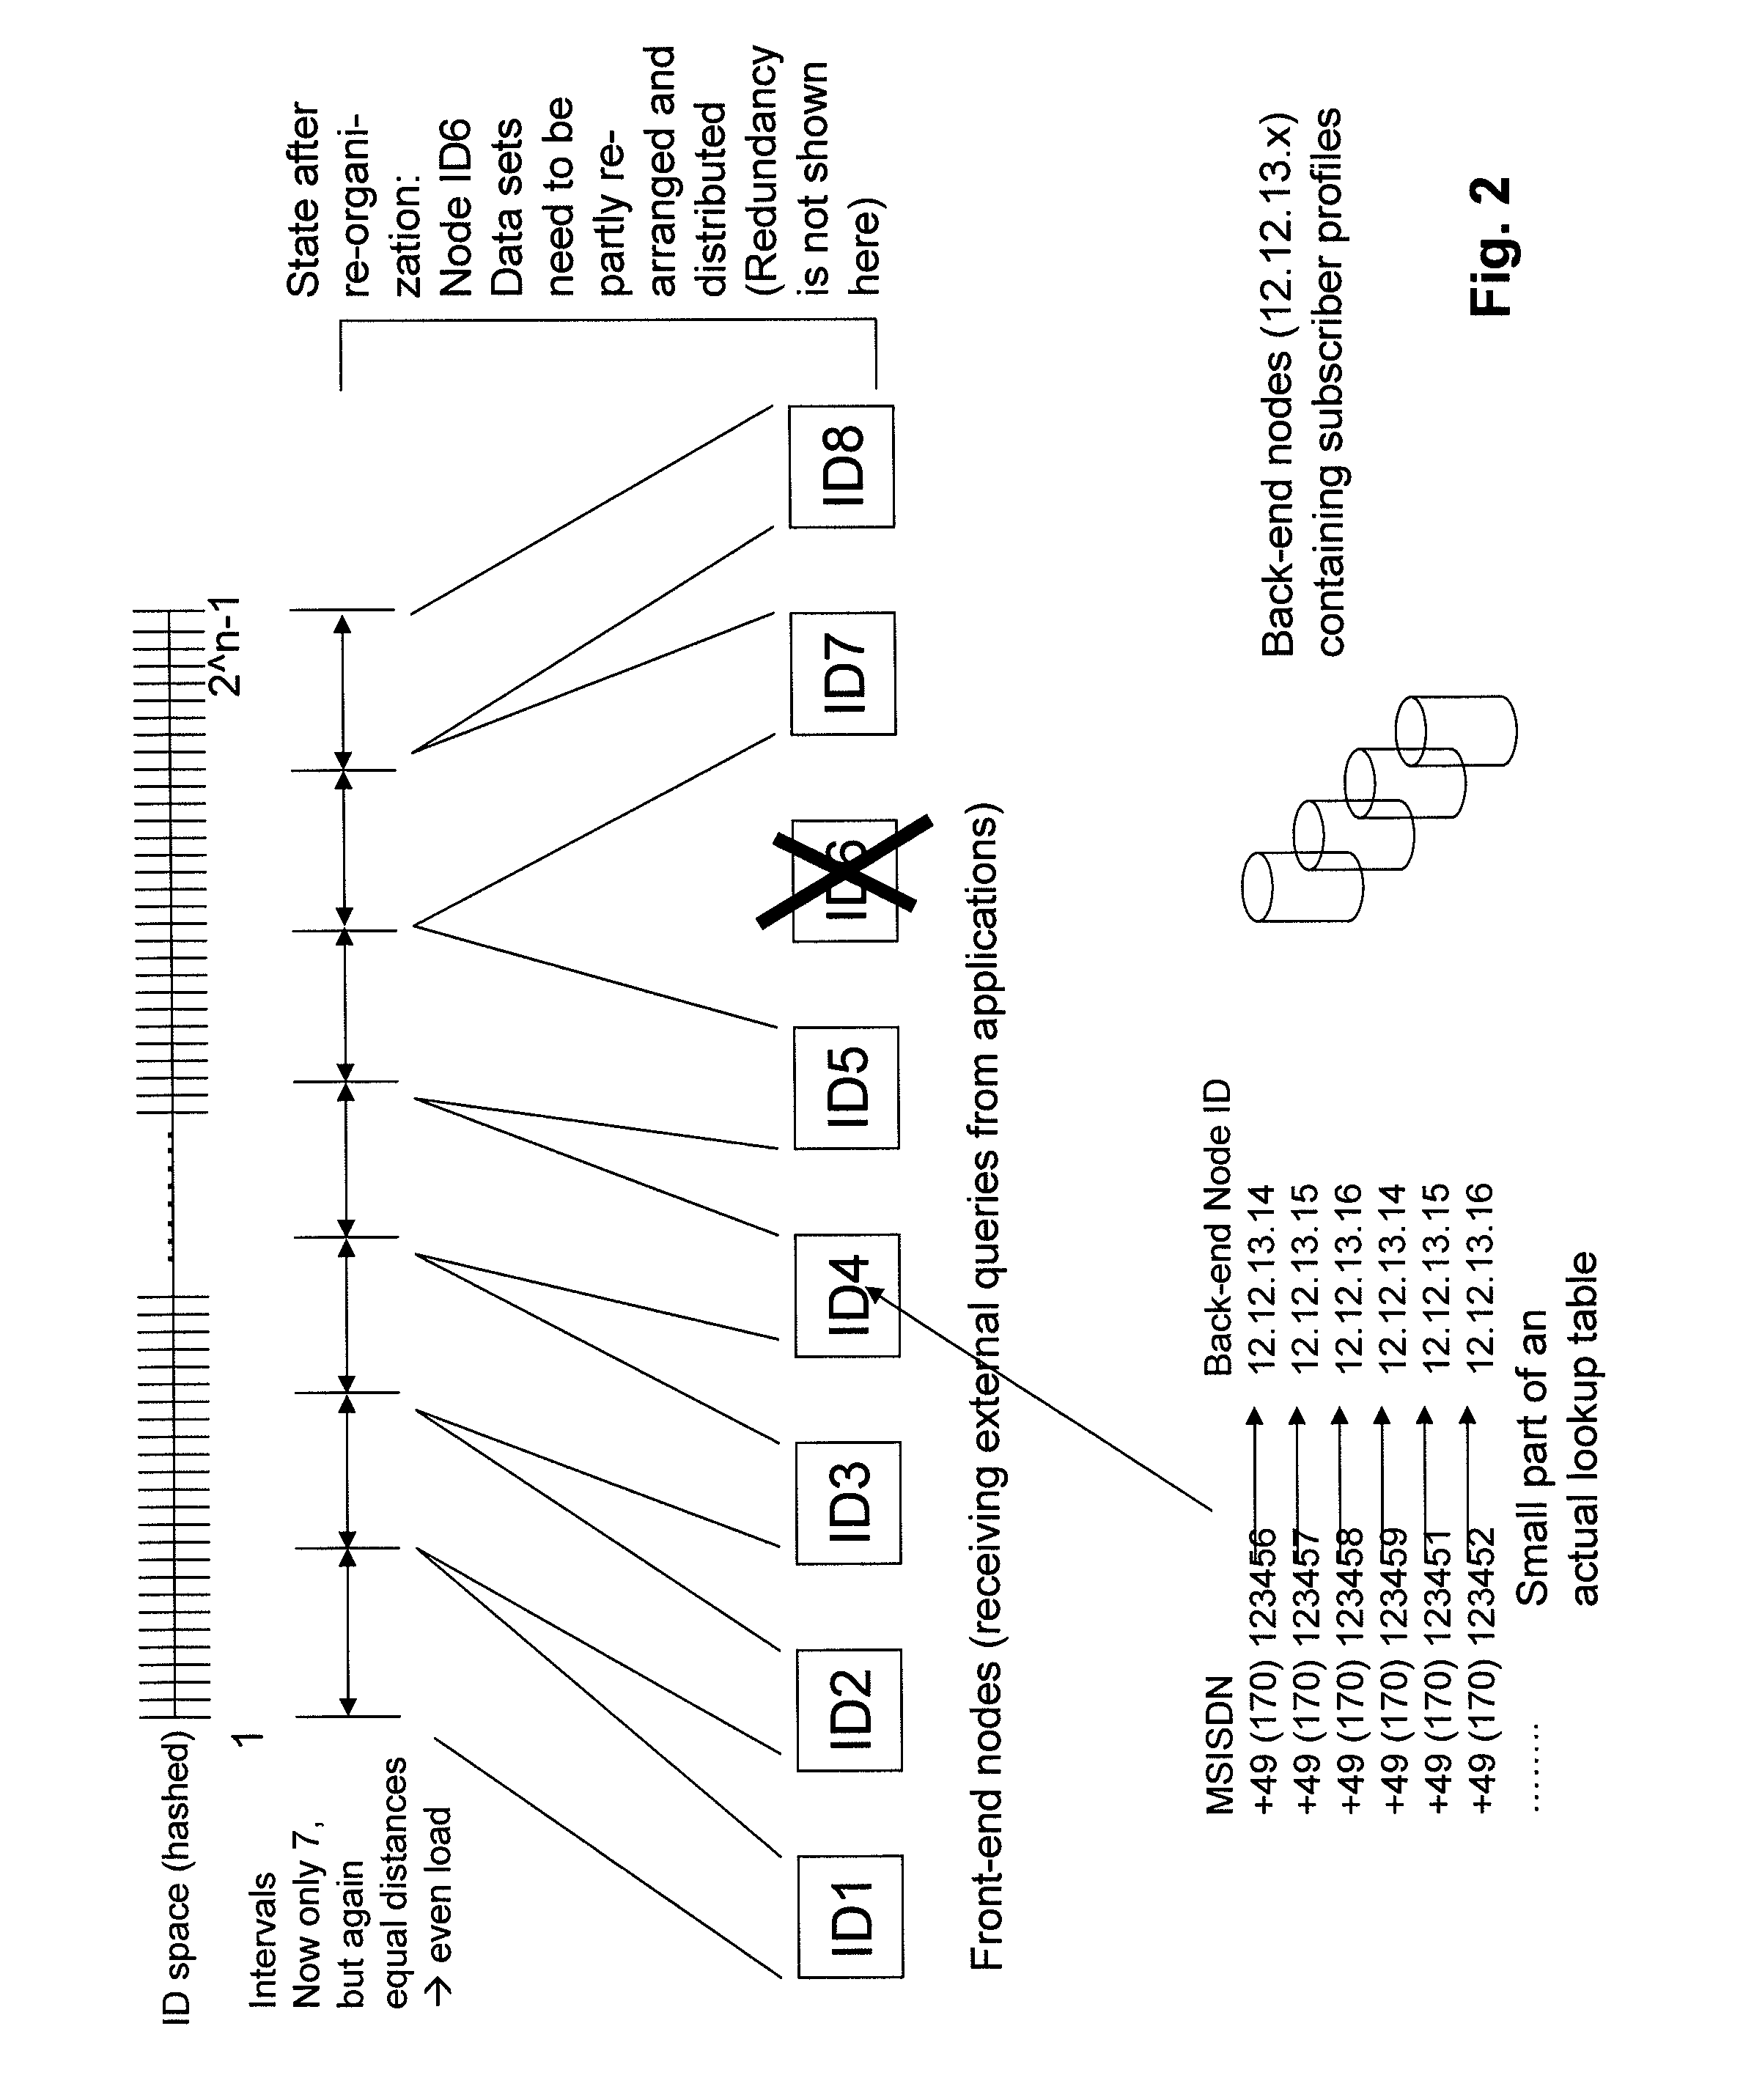 Load distribution in distributed database system